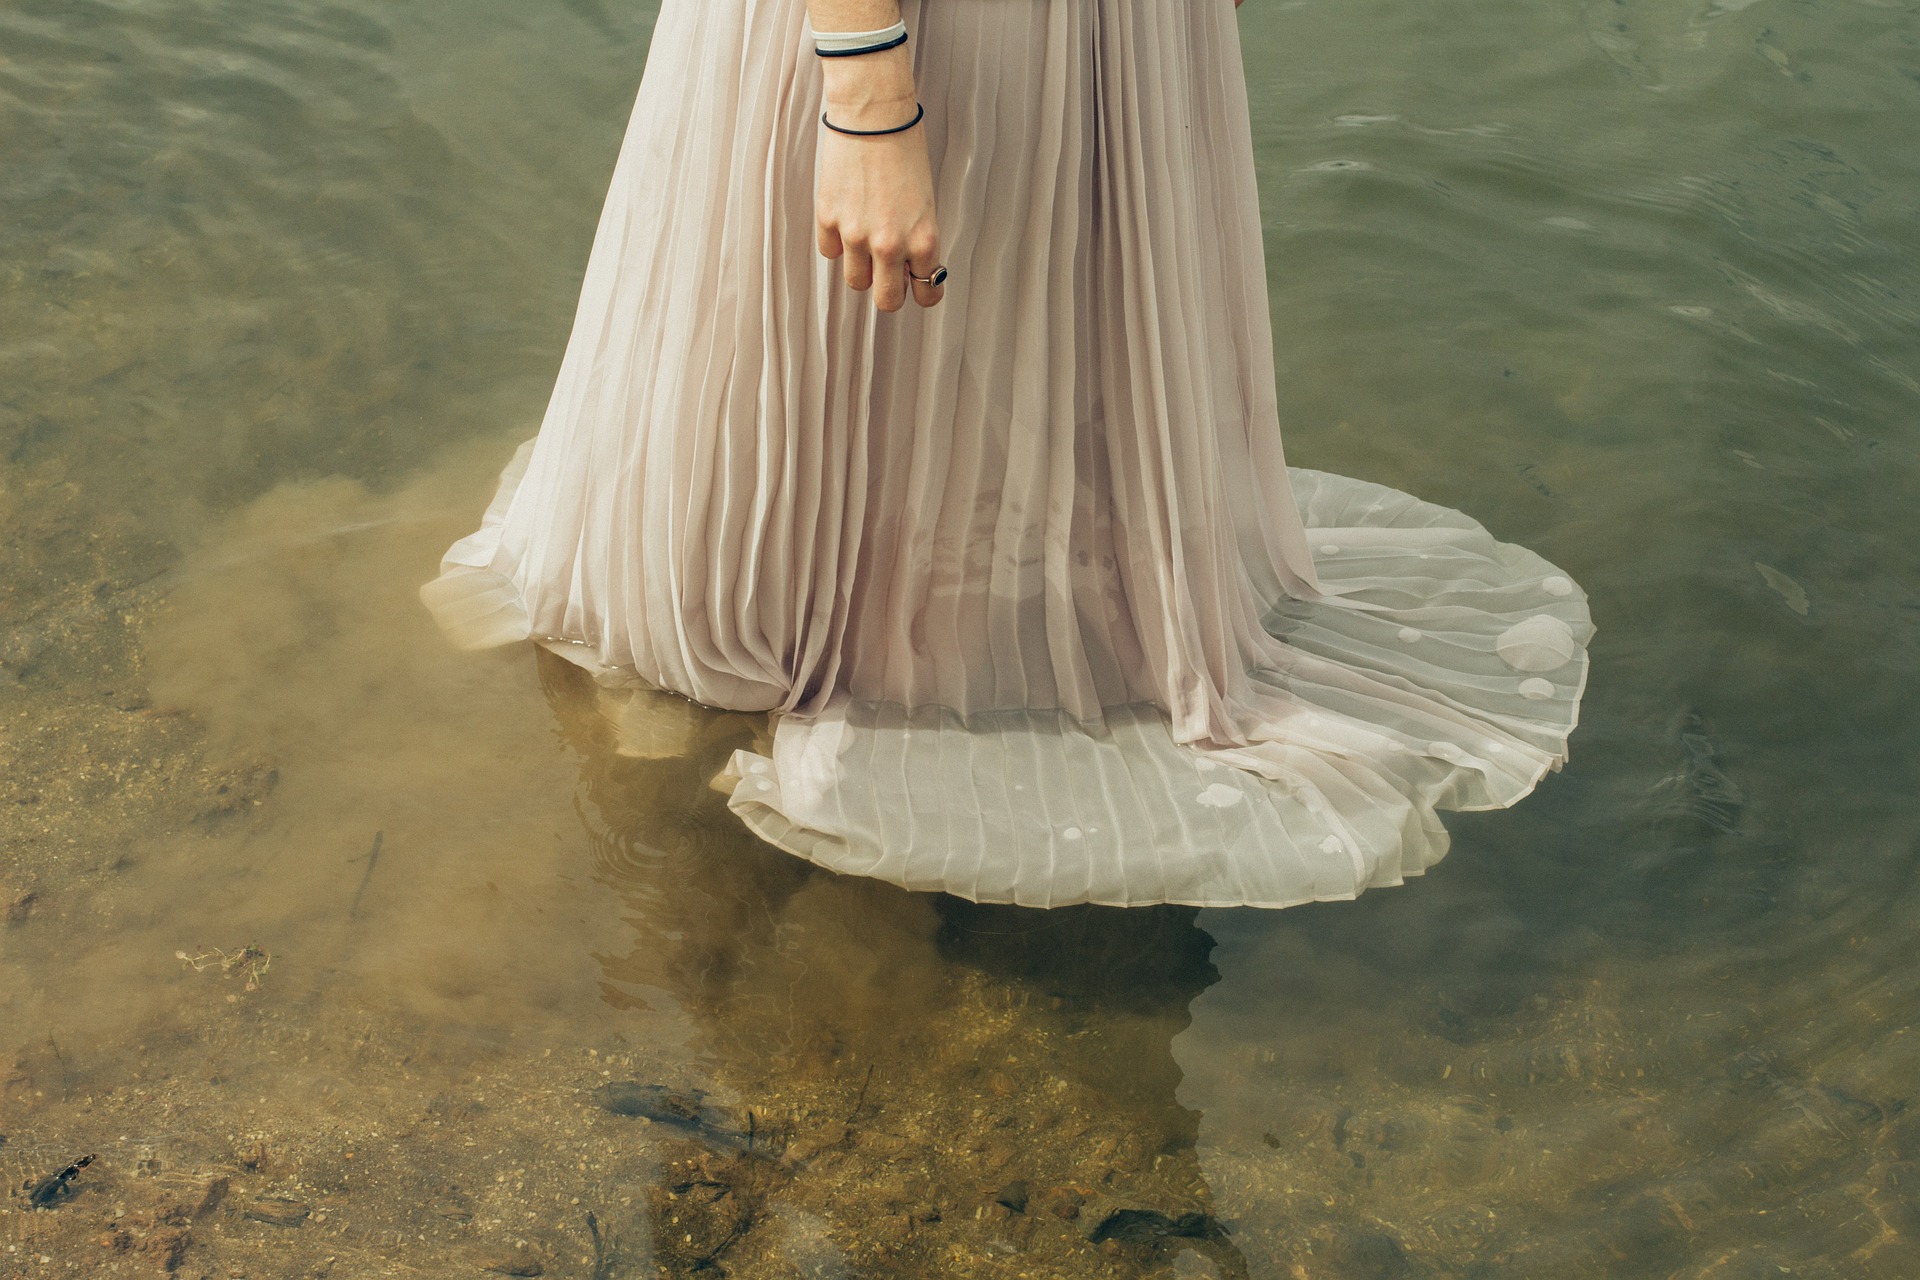 Bottom half of a woman standing in a shallow body of water. Her white skirt spreads out in the water